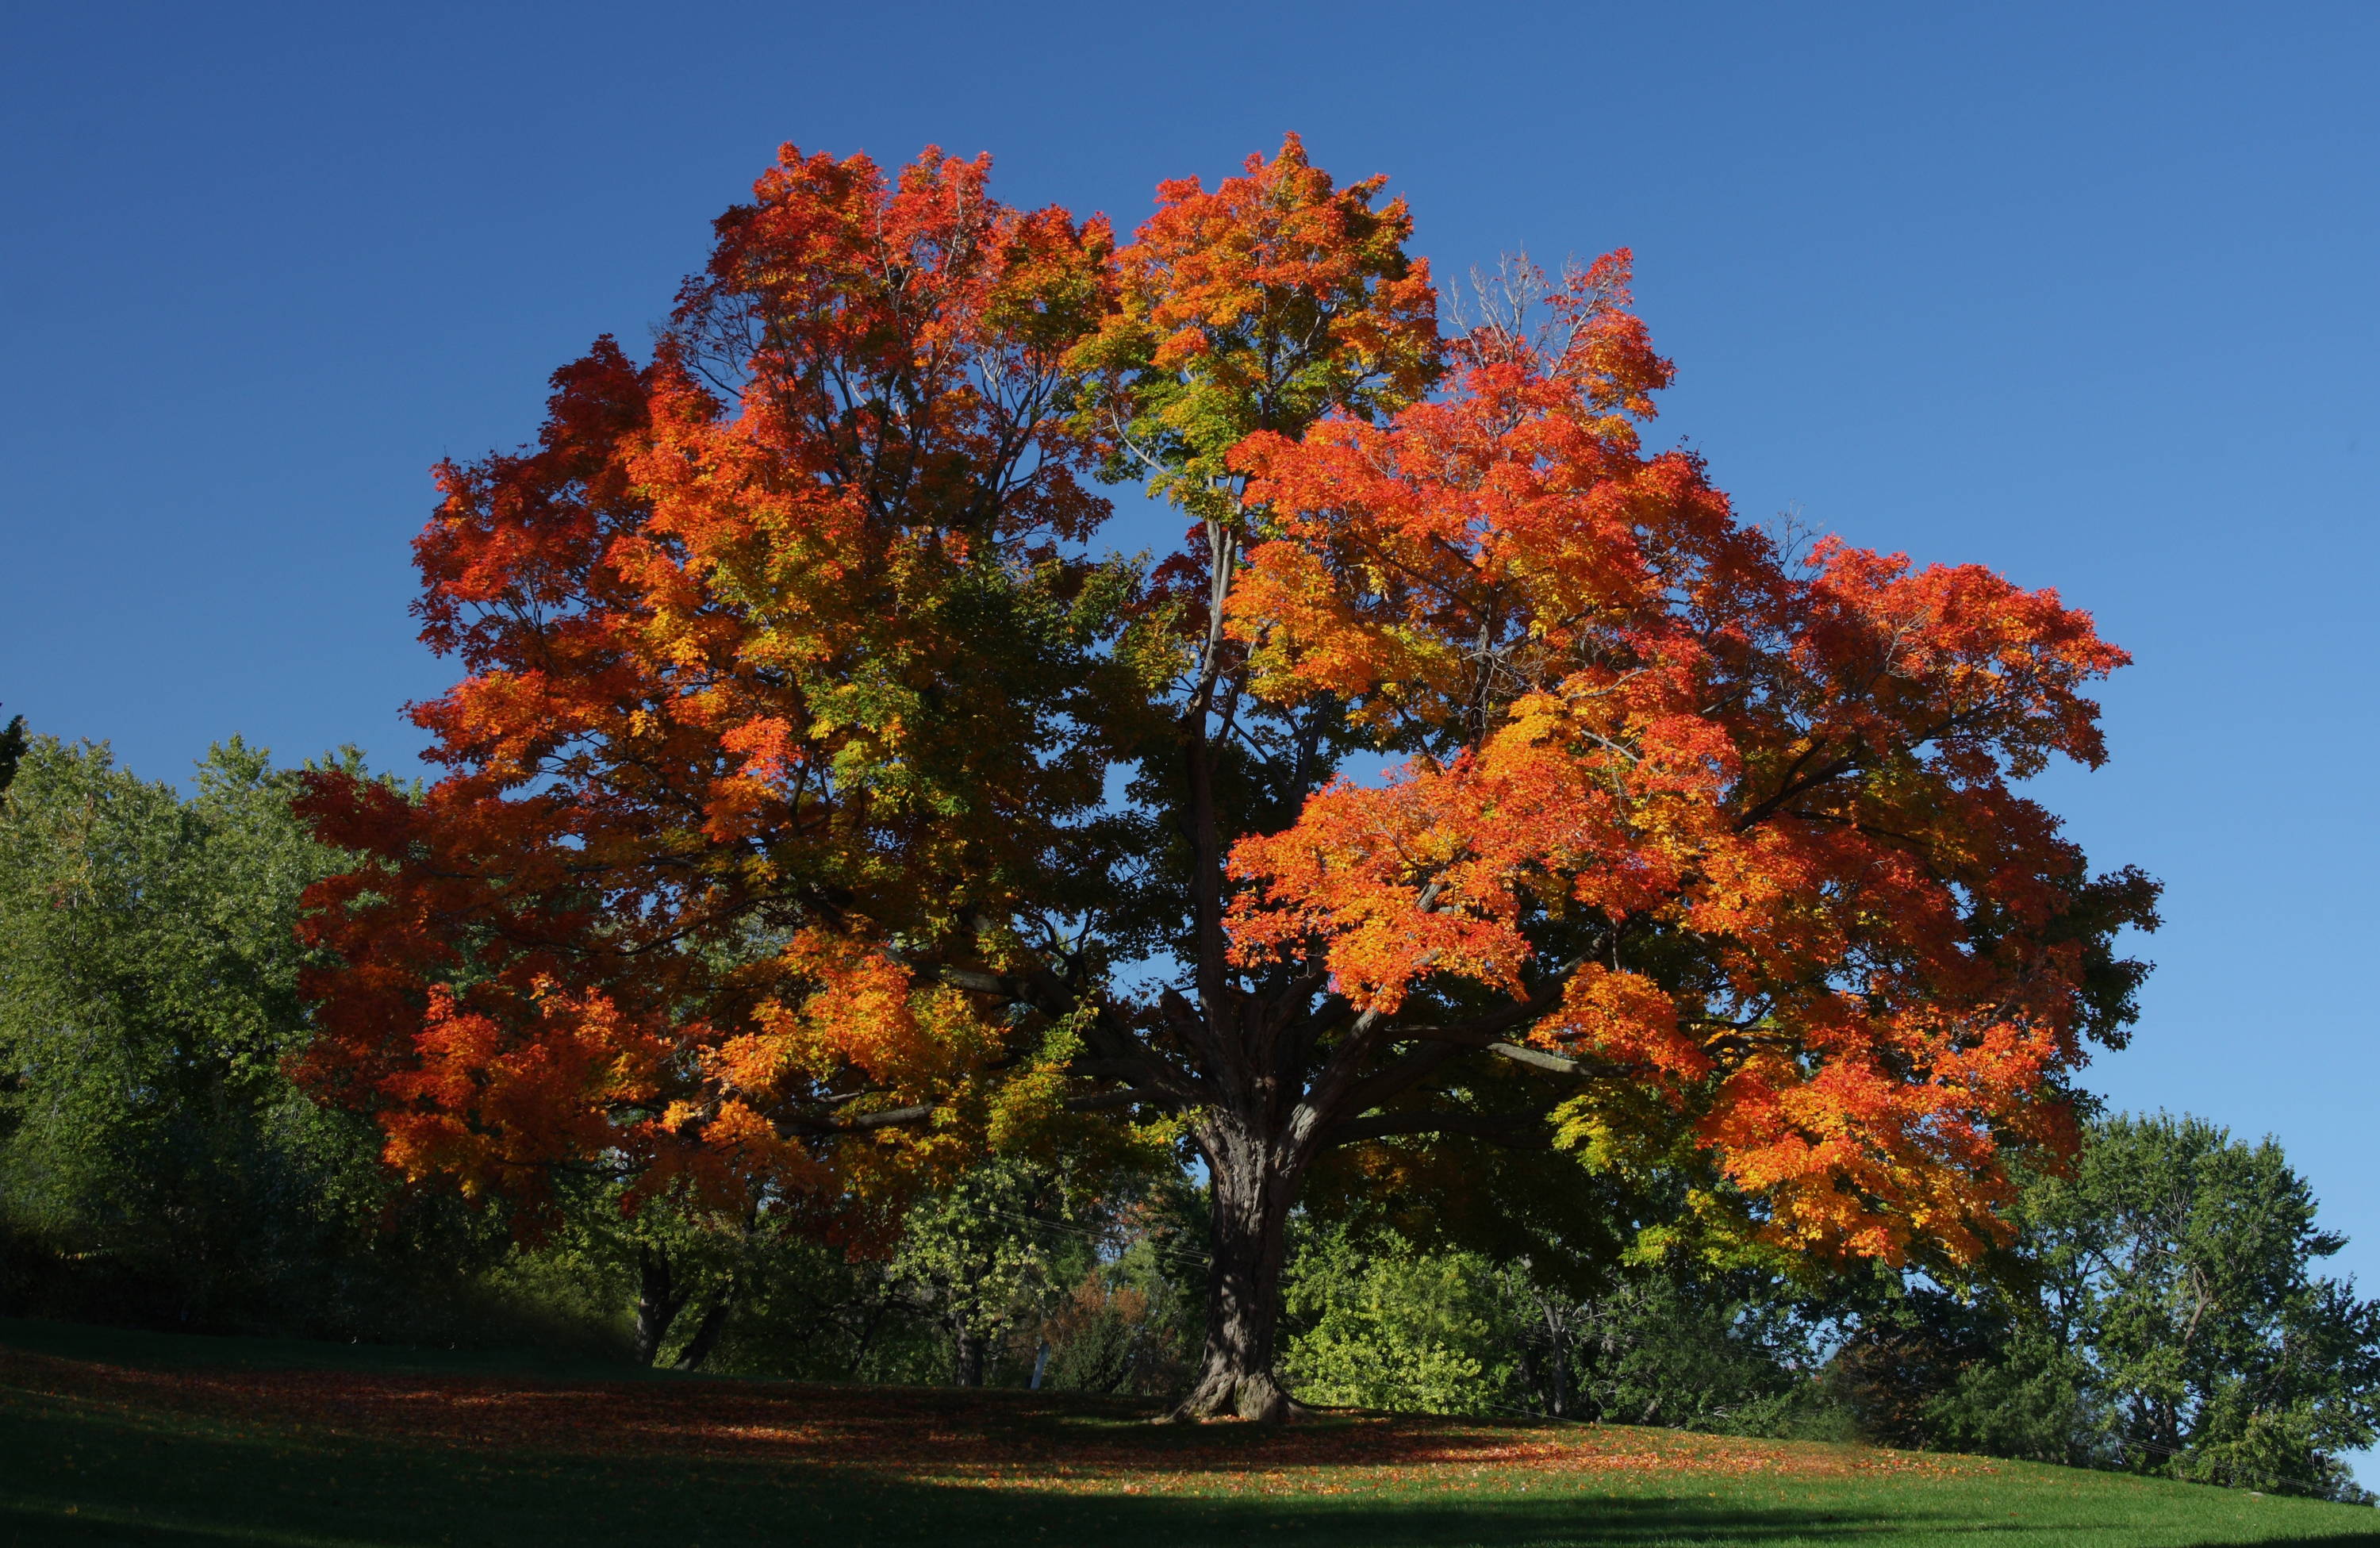 A large sugar maple tree in red and yellow tones.